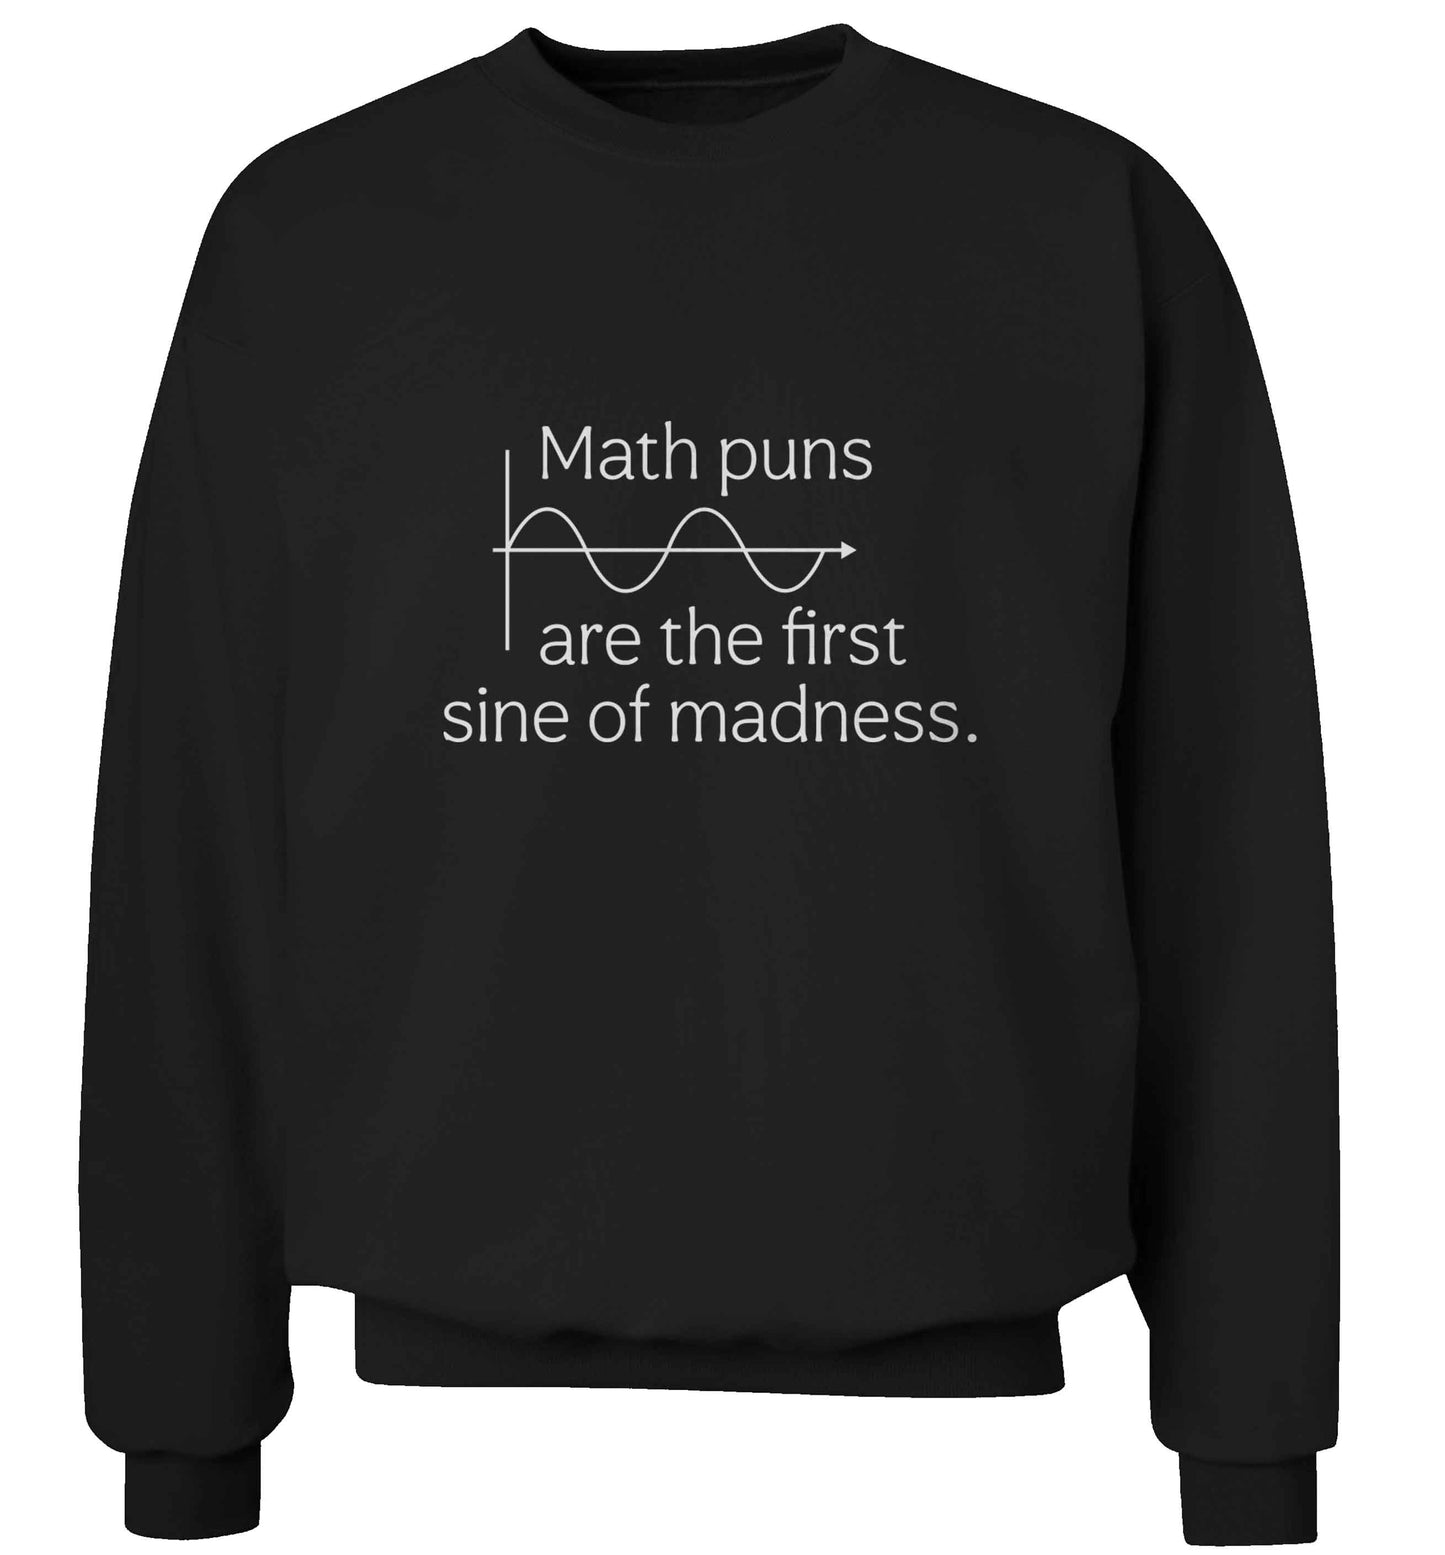 Math puns are the first sine of madness adult's unisex black sweater 2XL